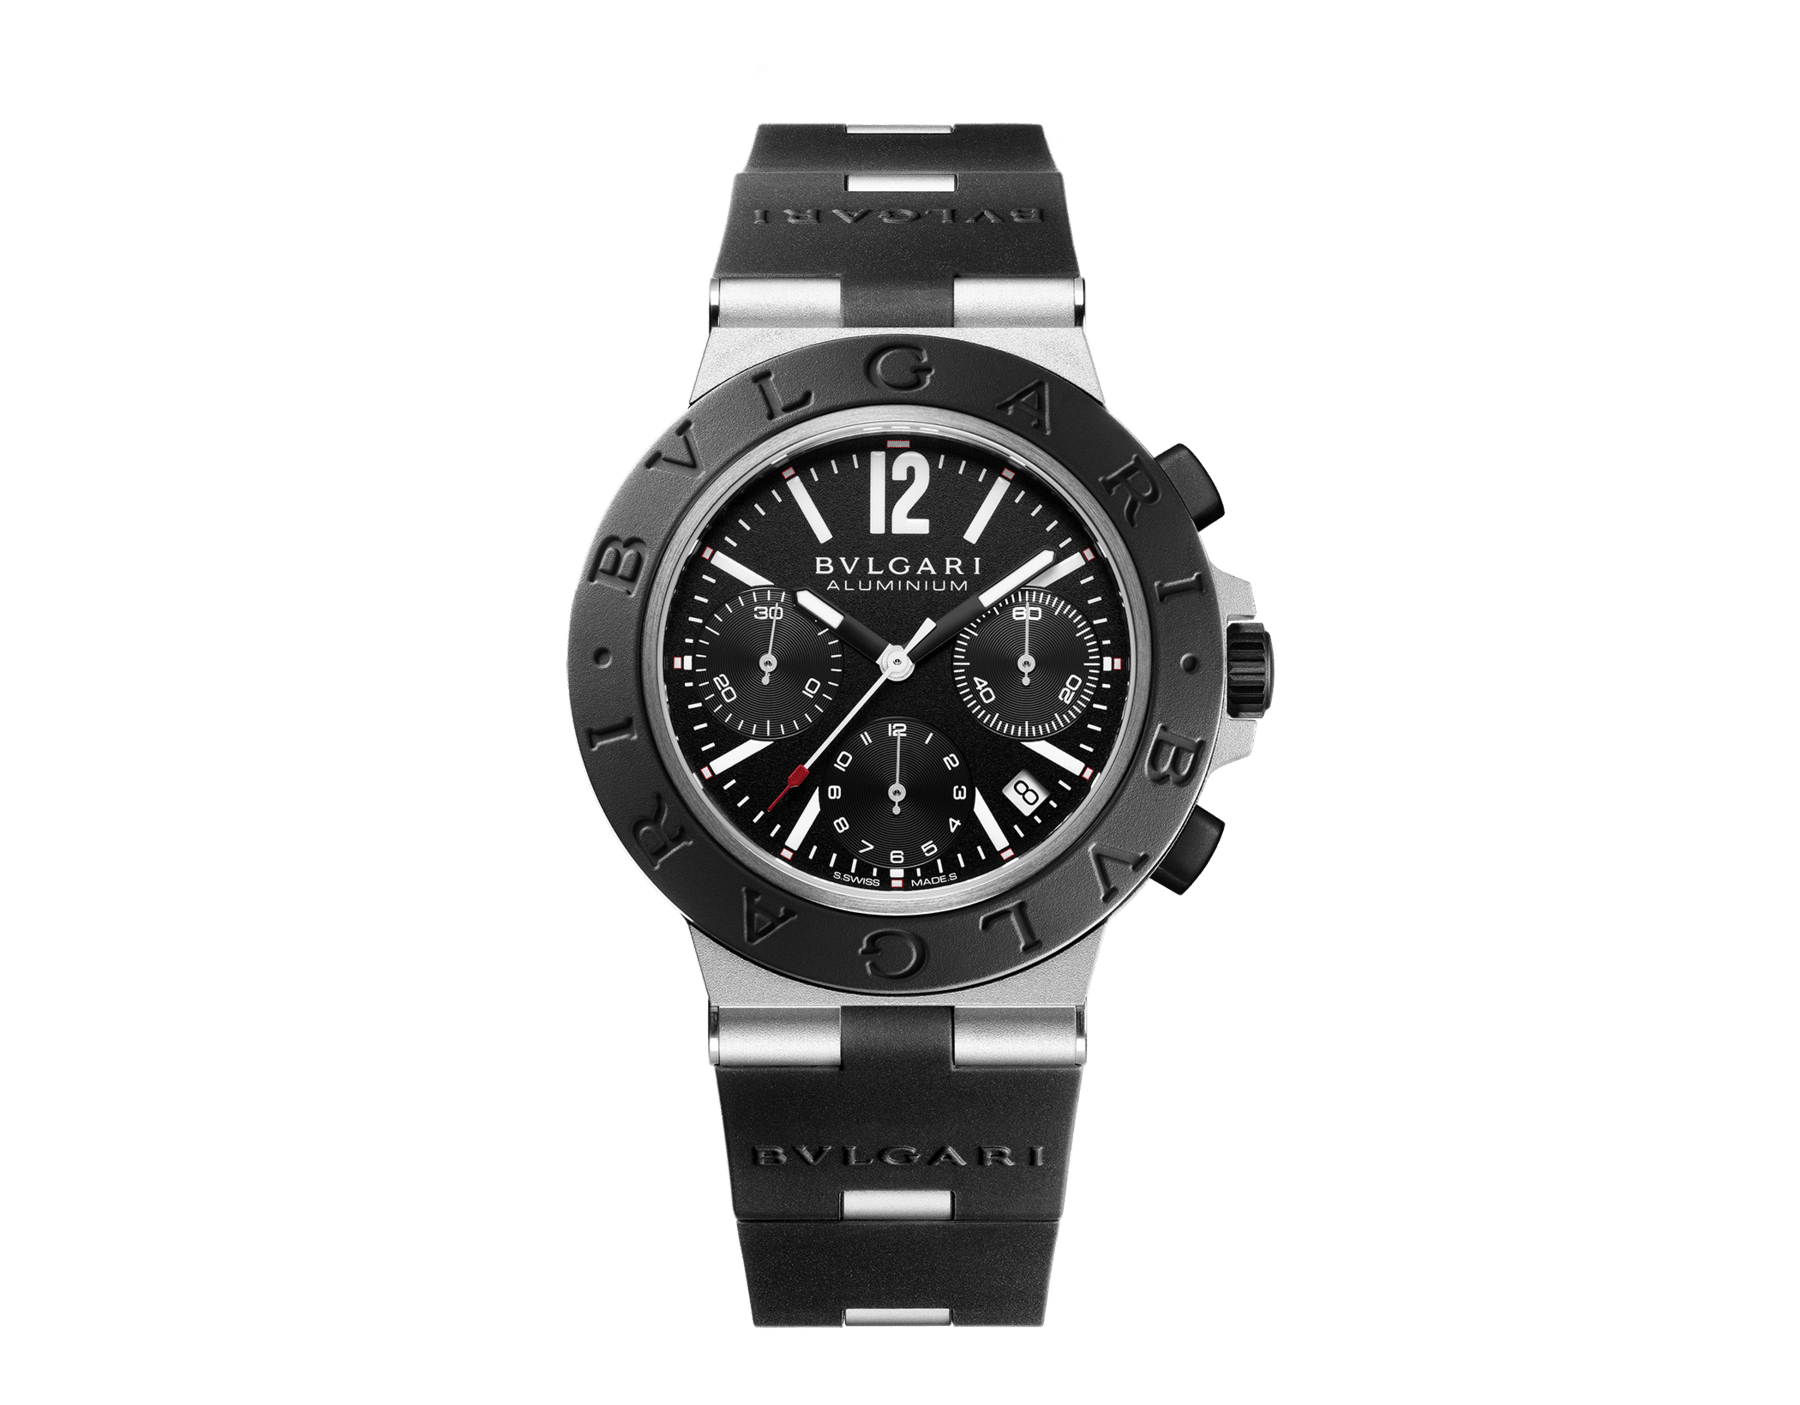 Bulgari Aluminium watch with mechanical manufacture movement, automatic winding, chronograph, 41 mm aluminum case, black rubber bezel and bracelet, and black dial. Water resistant up to 100 meters 103868 image 1